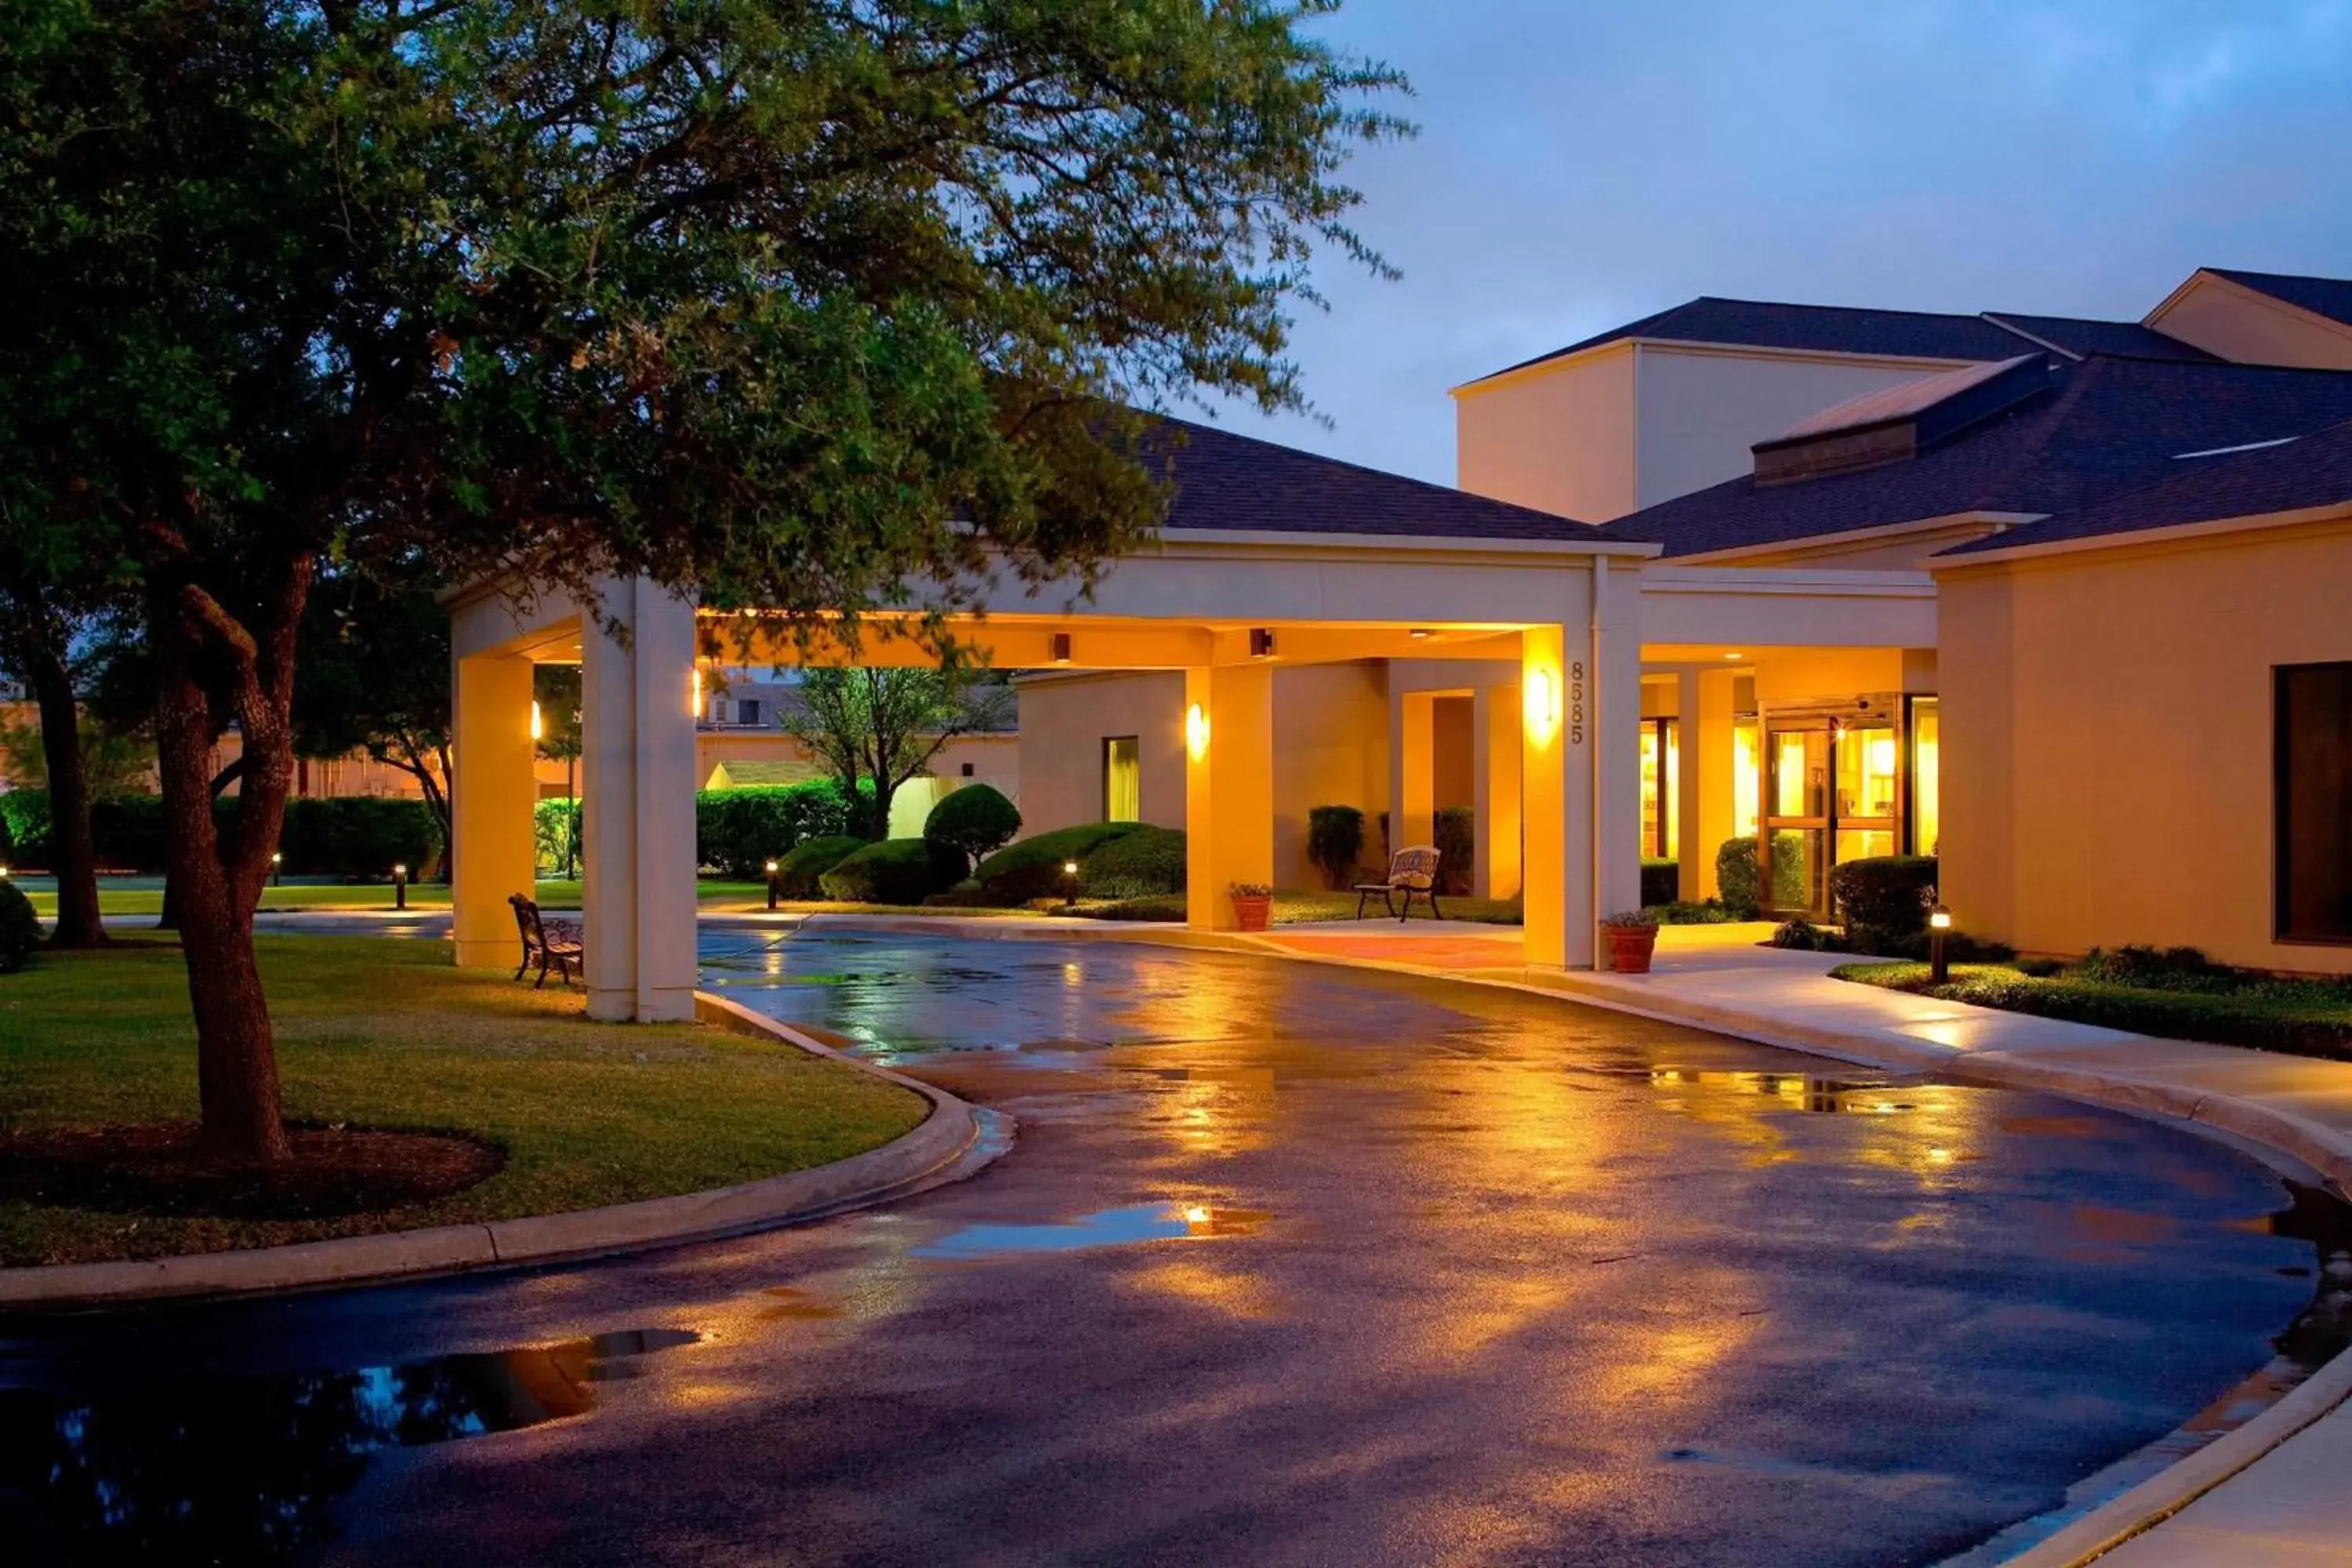 Property building, Swimming Pool in Courtyard by Marriott San Antonio Medical Center